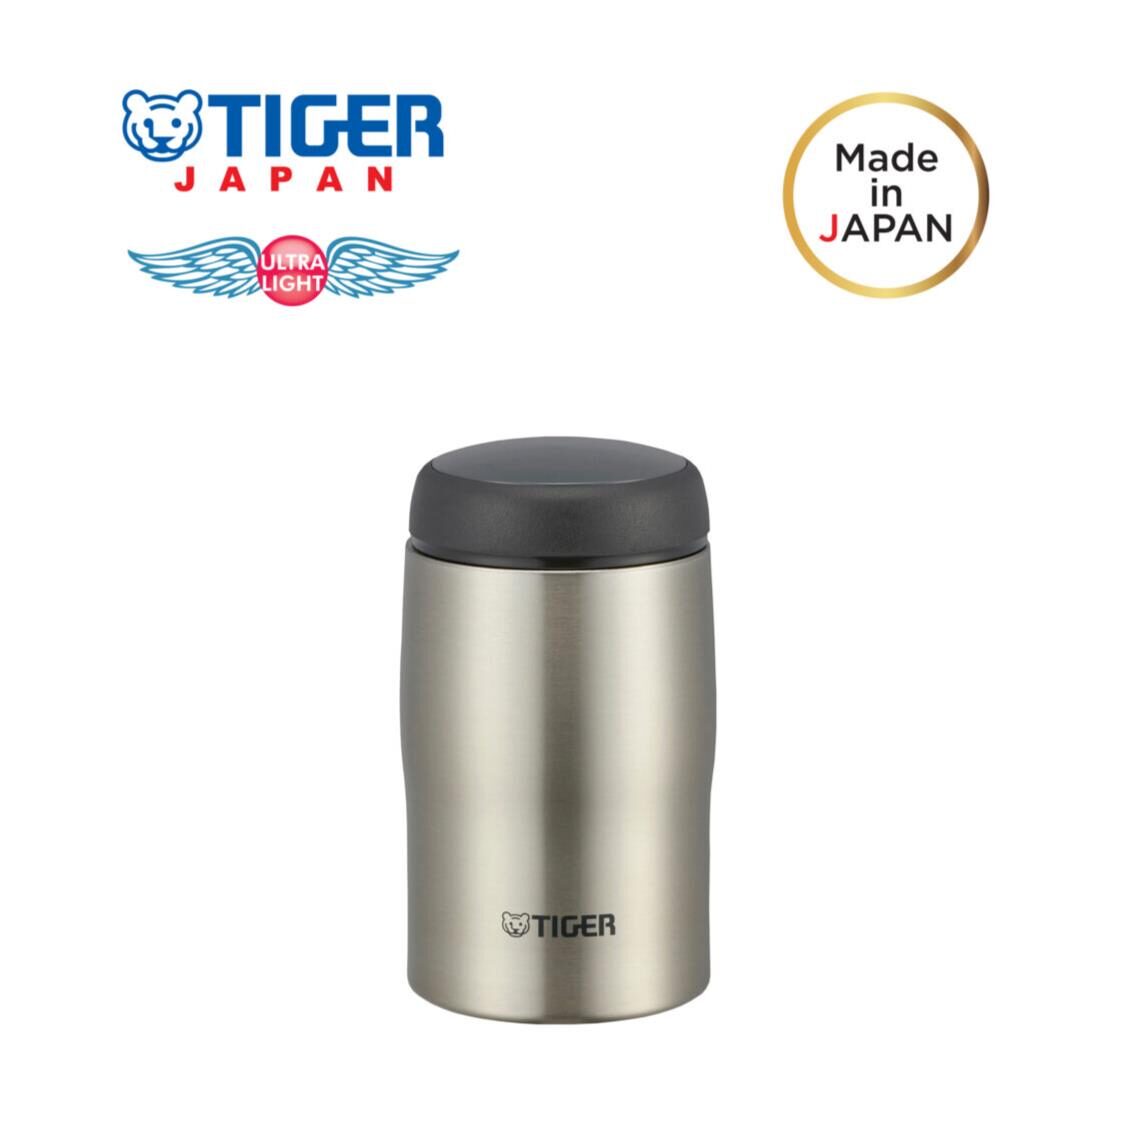 Tiger 240ml Double Stainless Steel Mug - Clear Stainless Made in Japan MJAB024 XC